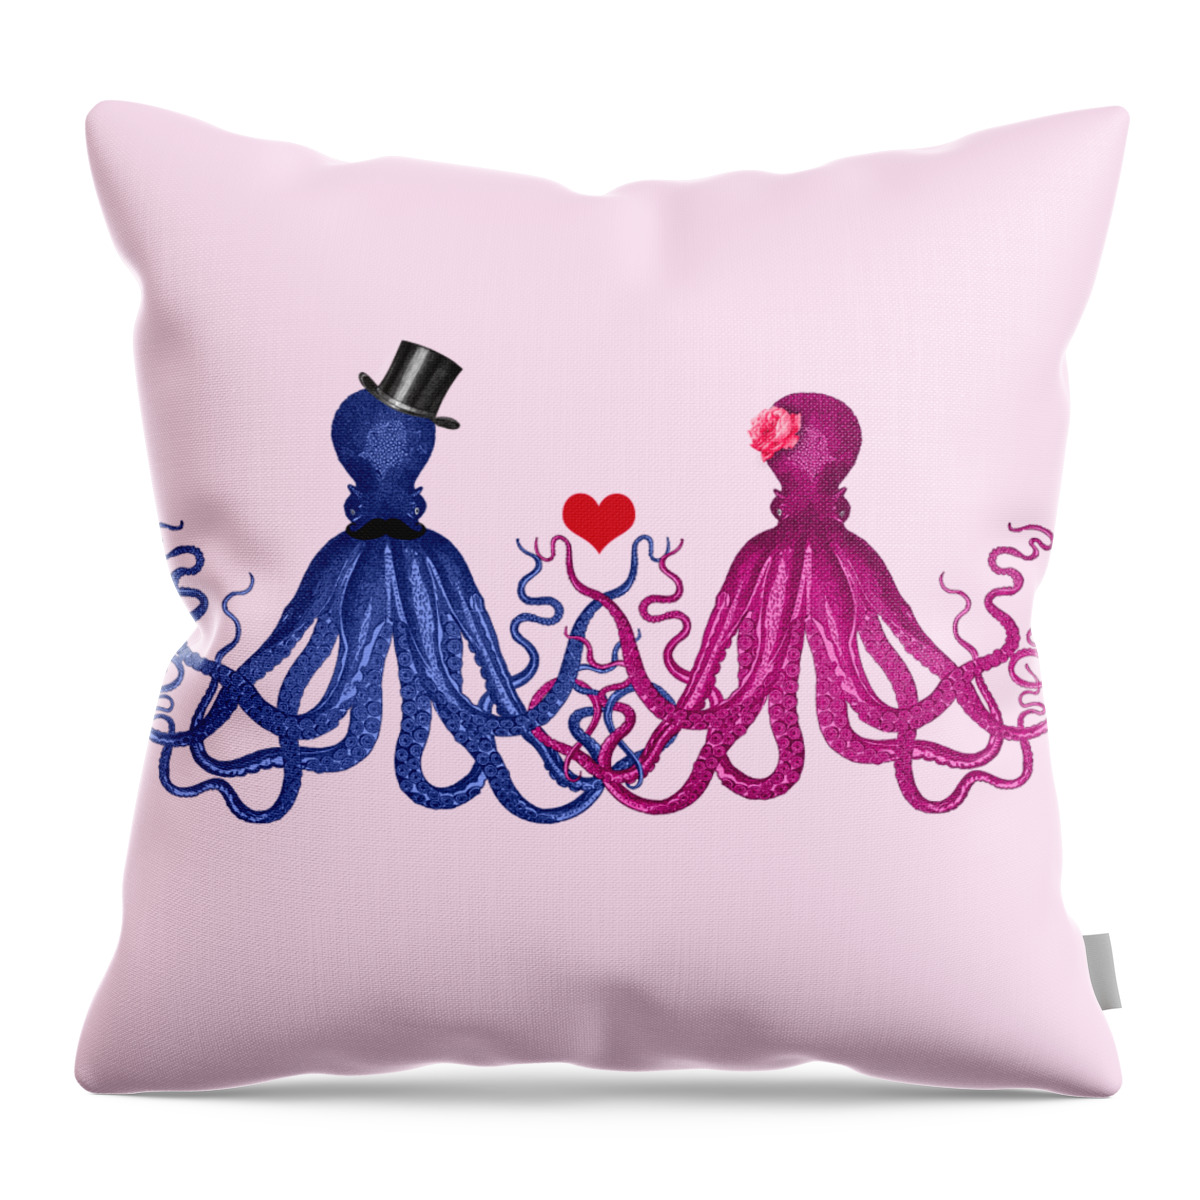 Octopus Throw Pillow featuring the mixed media Octopus newly weds by Madame Memento